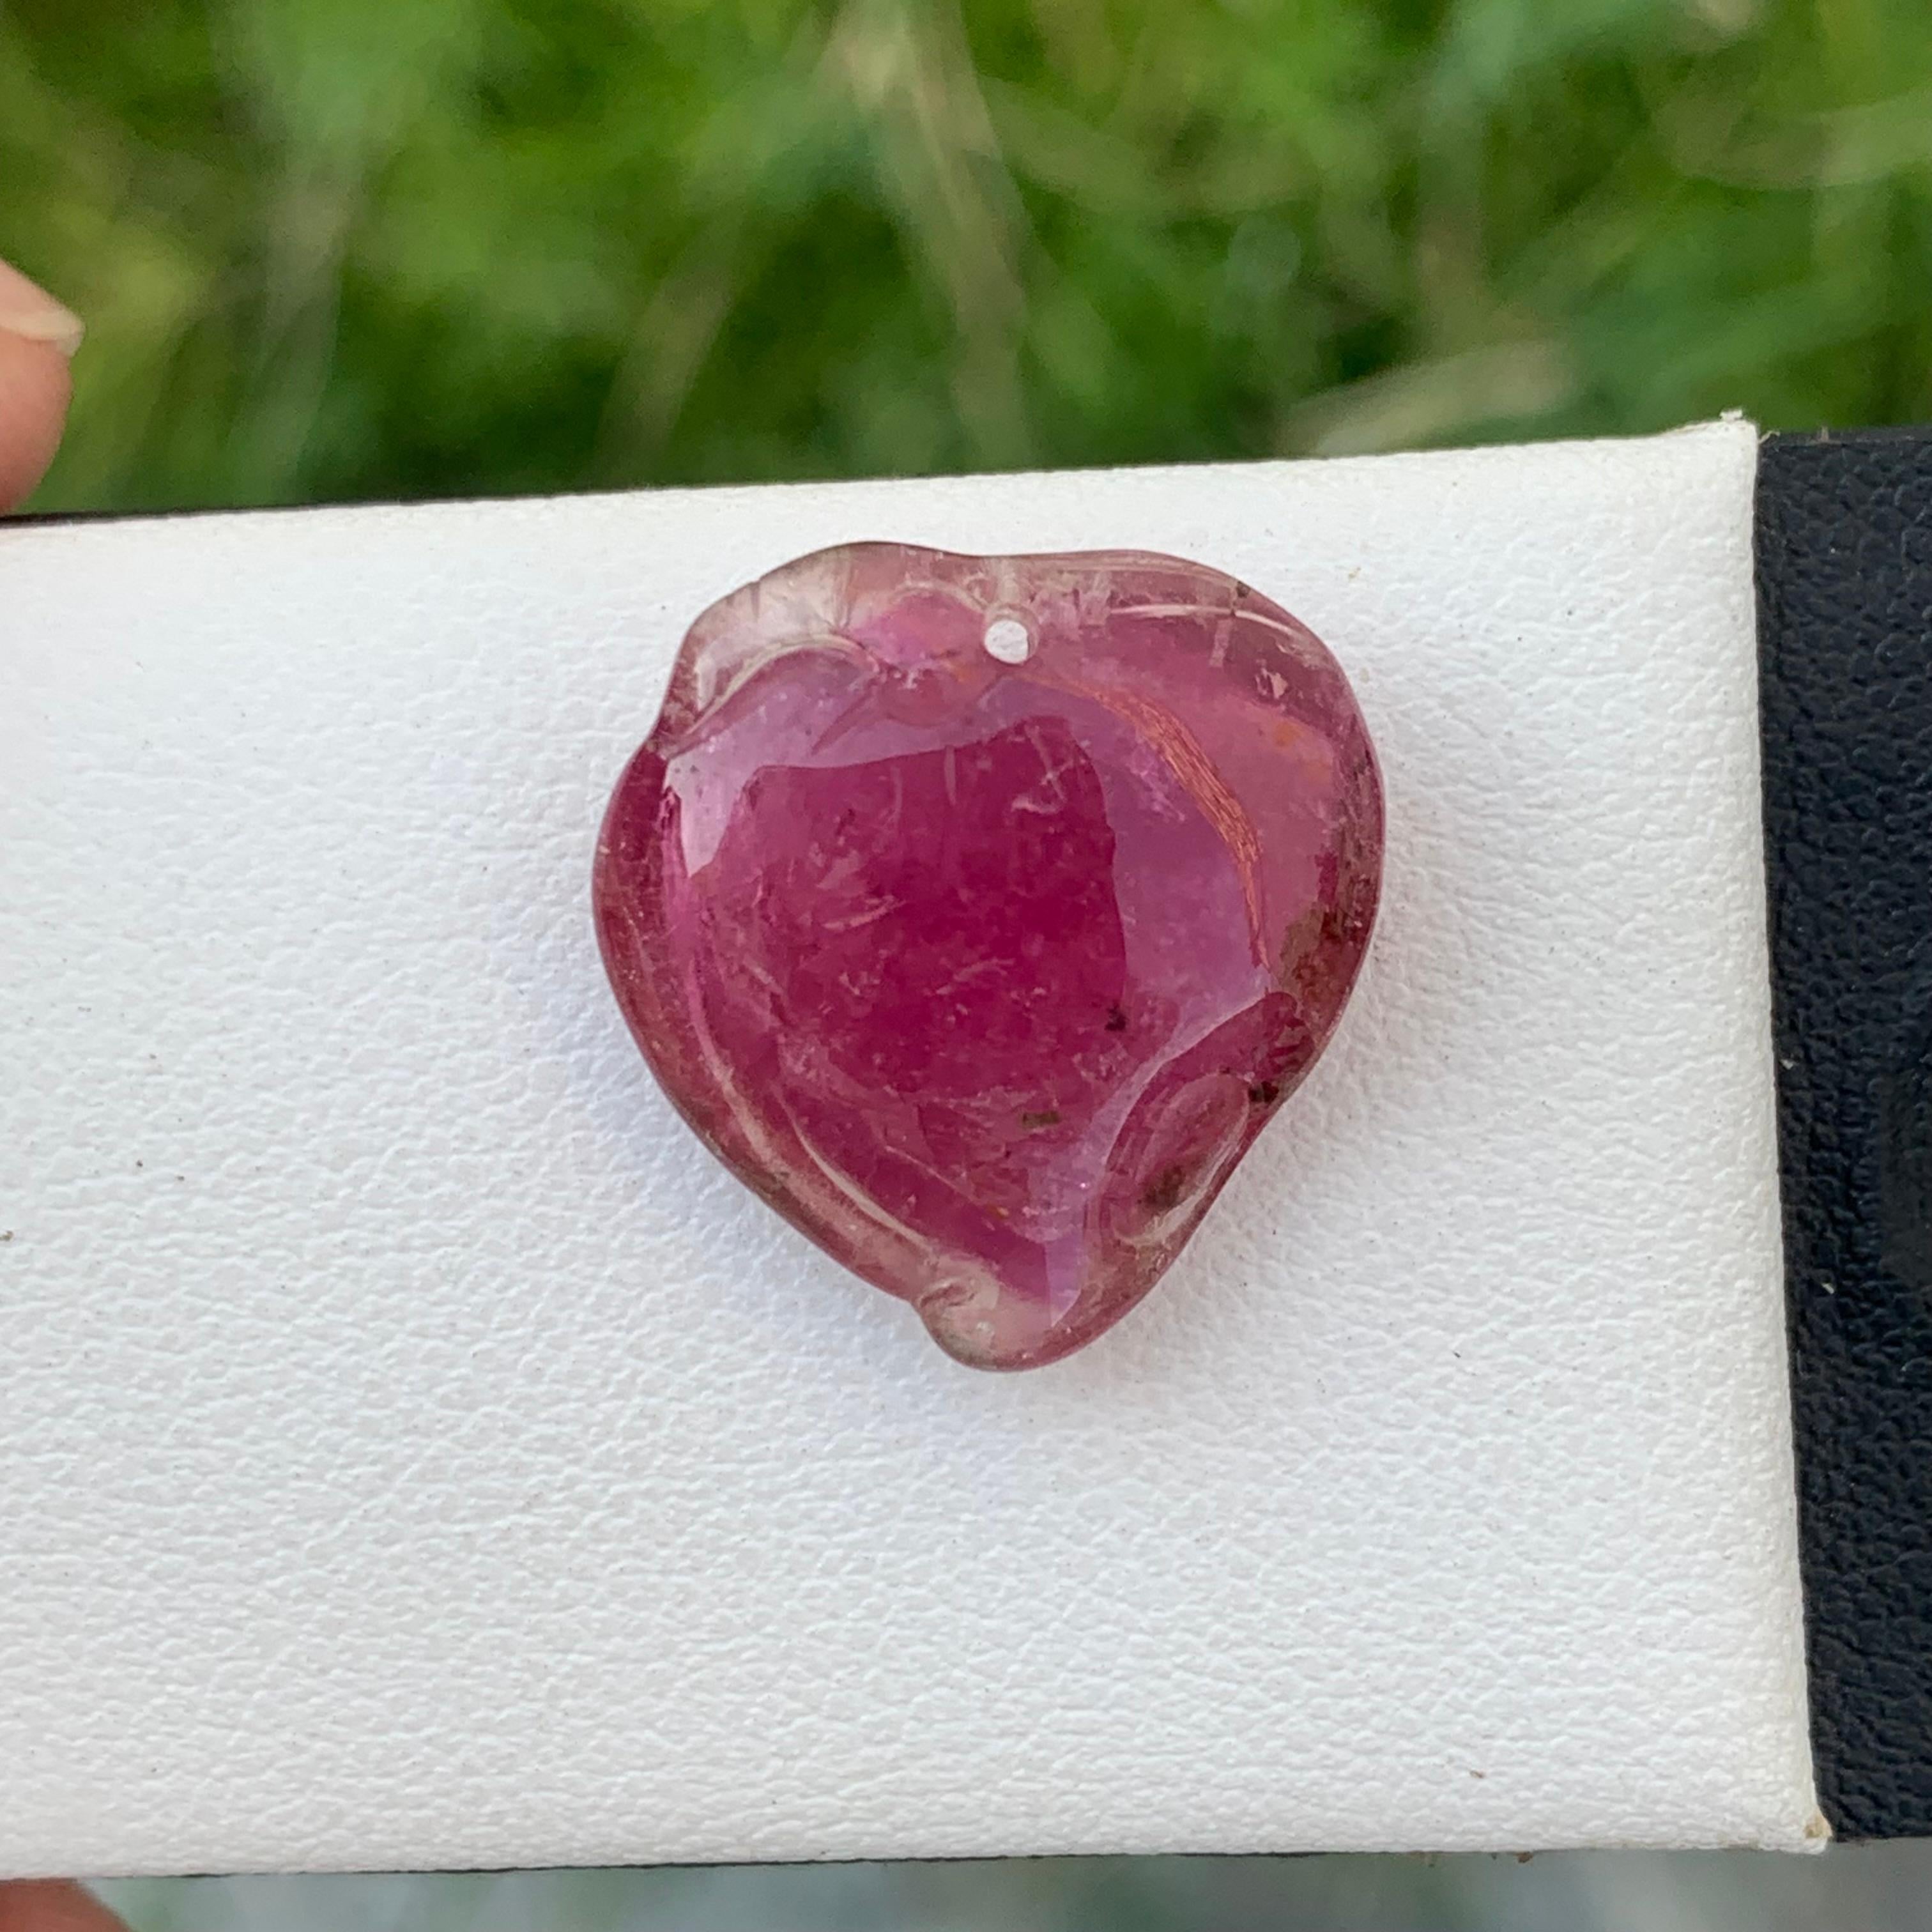 14.65 Carat Loose Heart Shape Tourmaline Drilled Carving from Africa For Sale 1